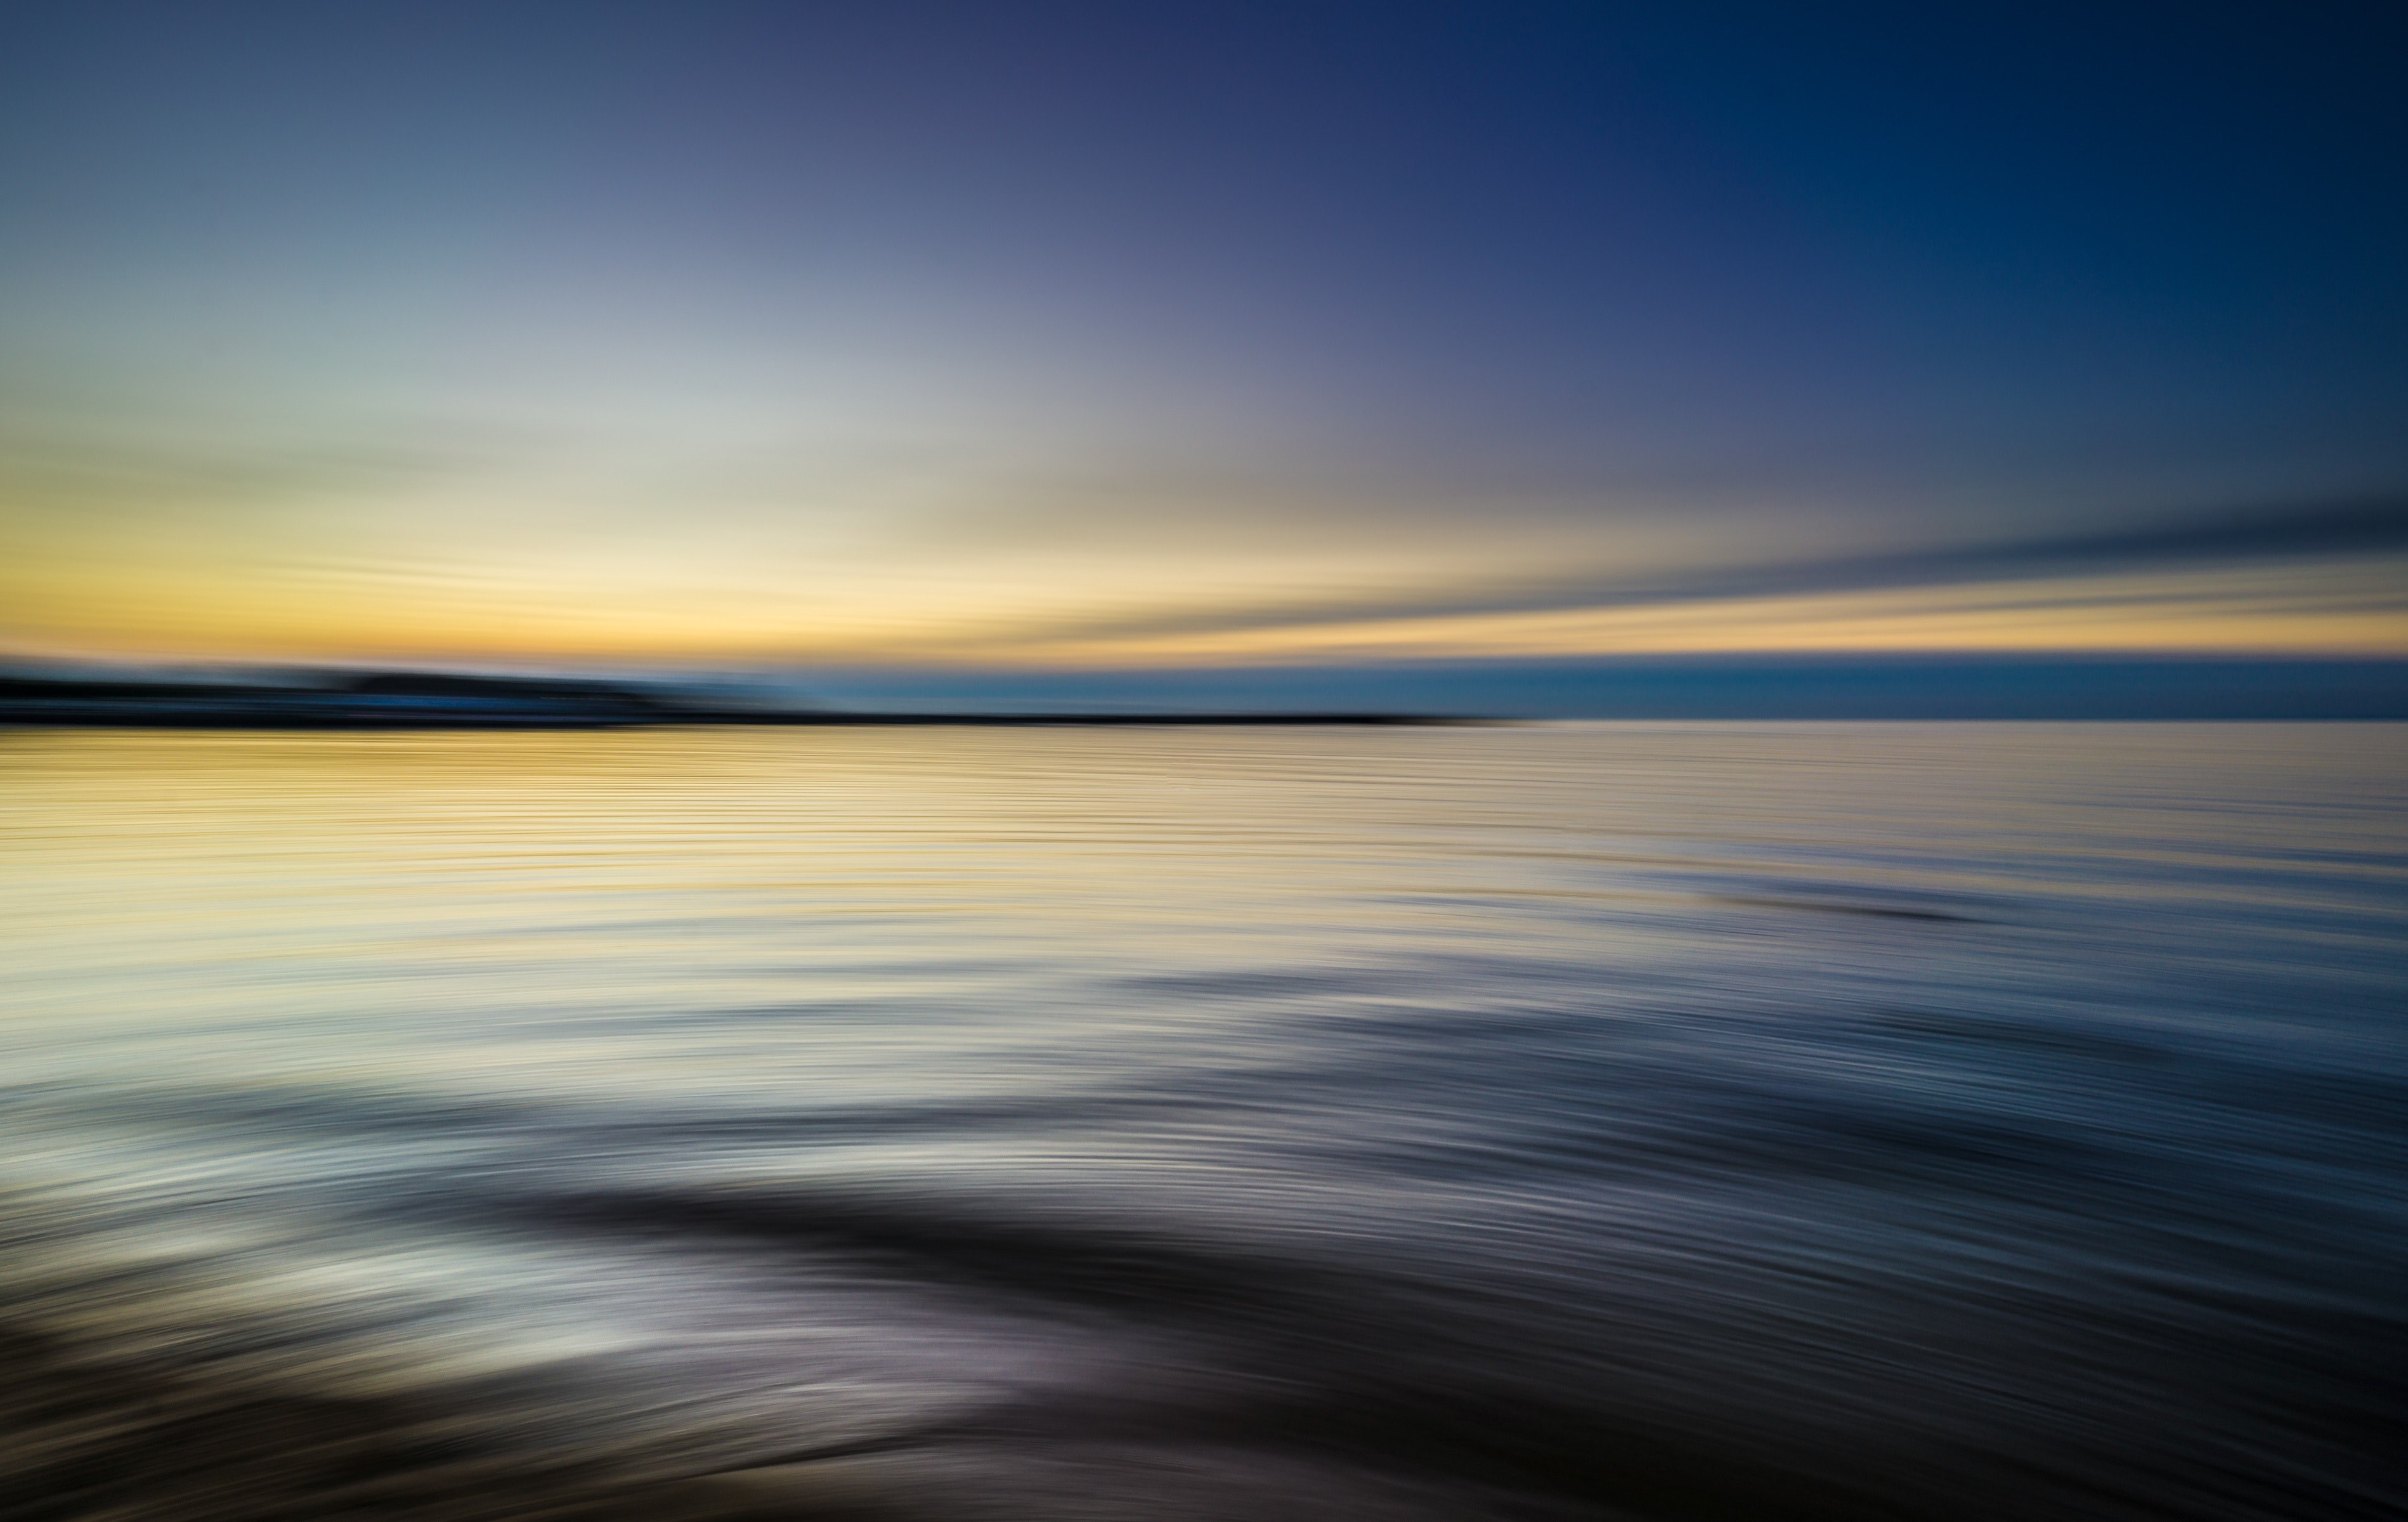 Wallpaper id tranquil rippling waters reflect a blue and yellow sky at sunset water sea calm and horizon hd k wallpaper free download